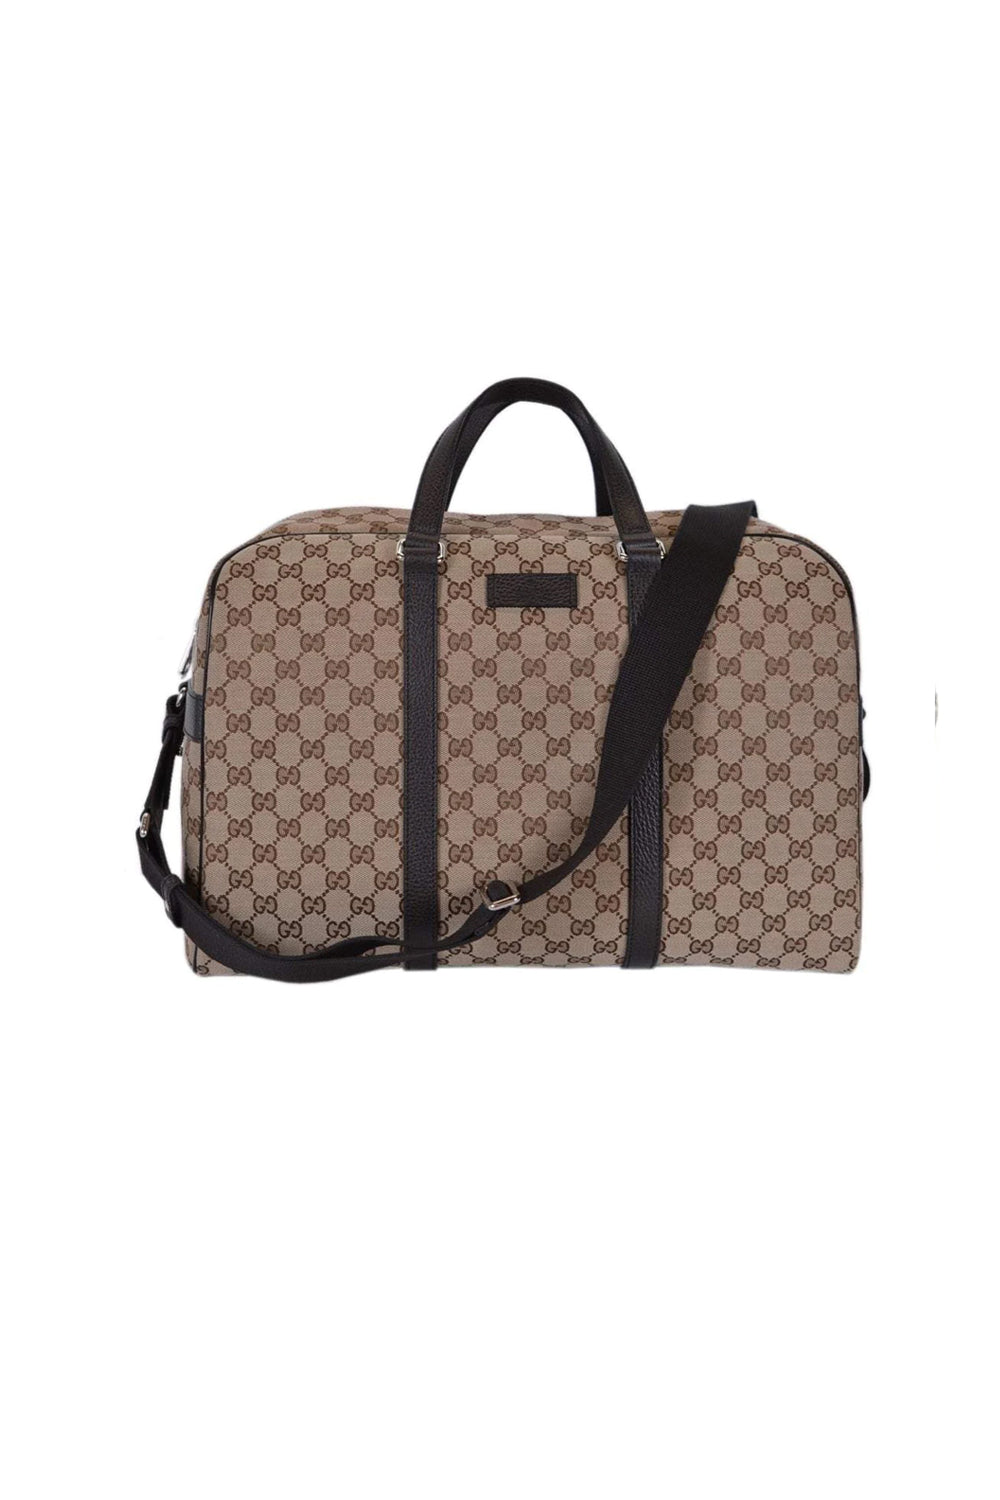 Gucci GG Logo Canvas Leather Removable Strap Bag